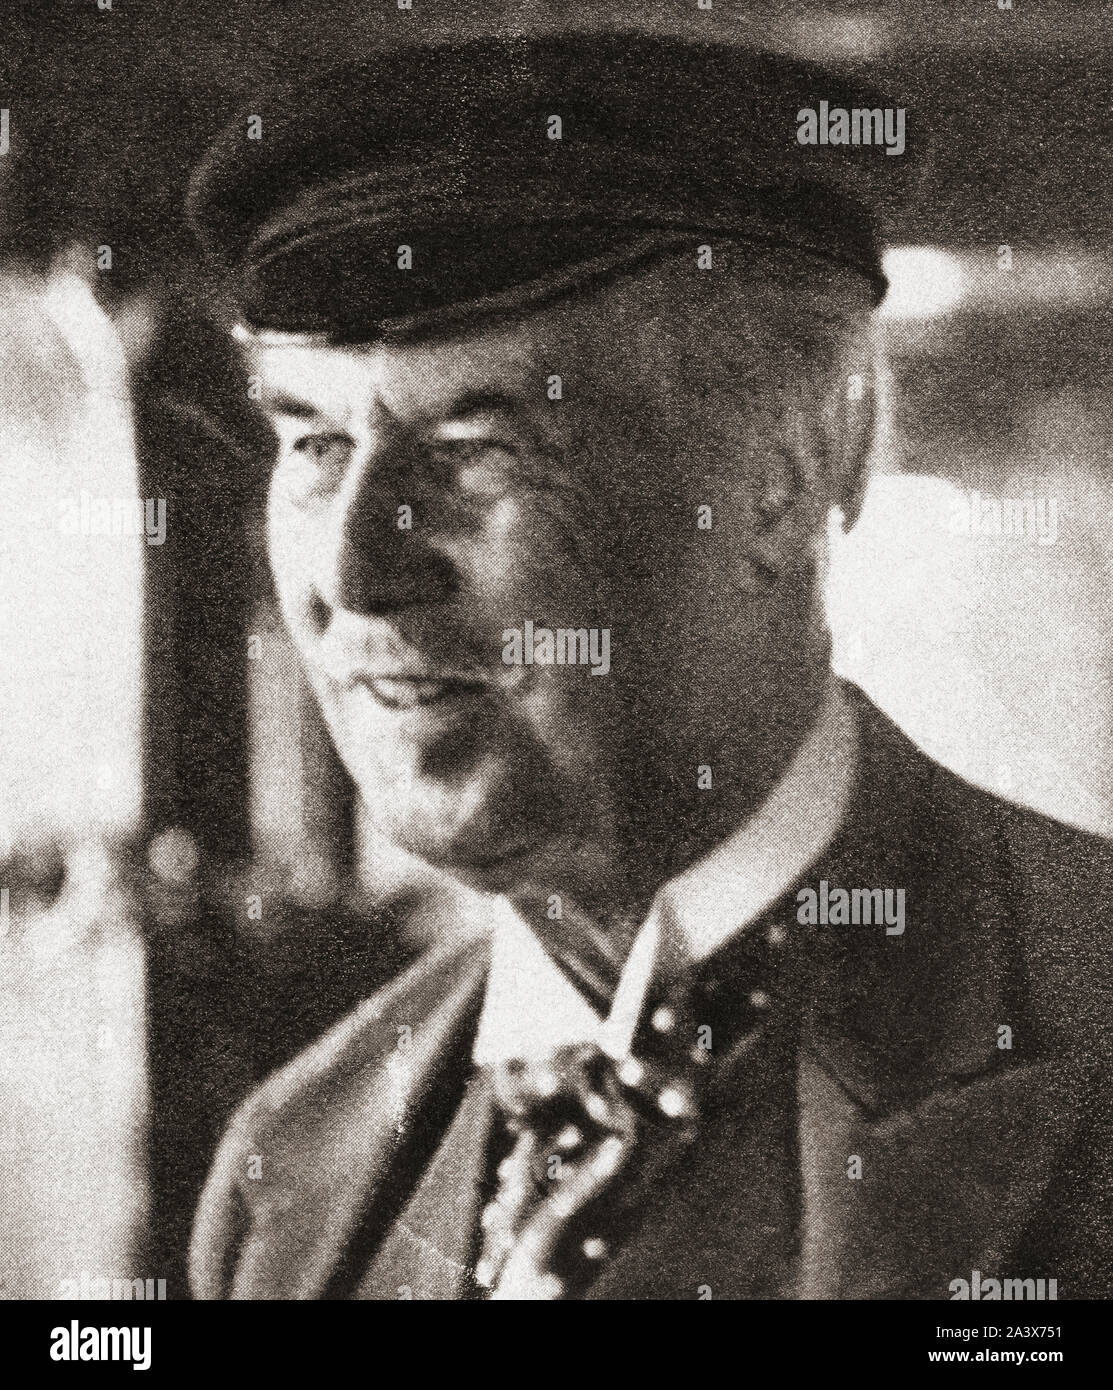 Sir Thomas Johnstone Lipton, 1st Baronet, 1848 – 1931.  Scotish self-made man, merchant, and yachtsman.  From The Pageant of the Century, published 1934. Stock Photo